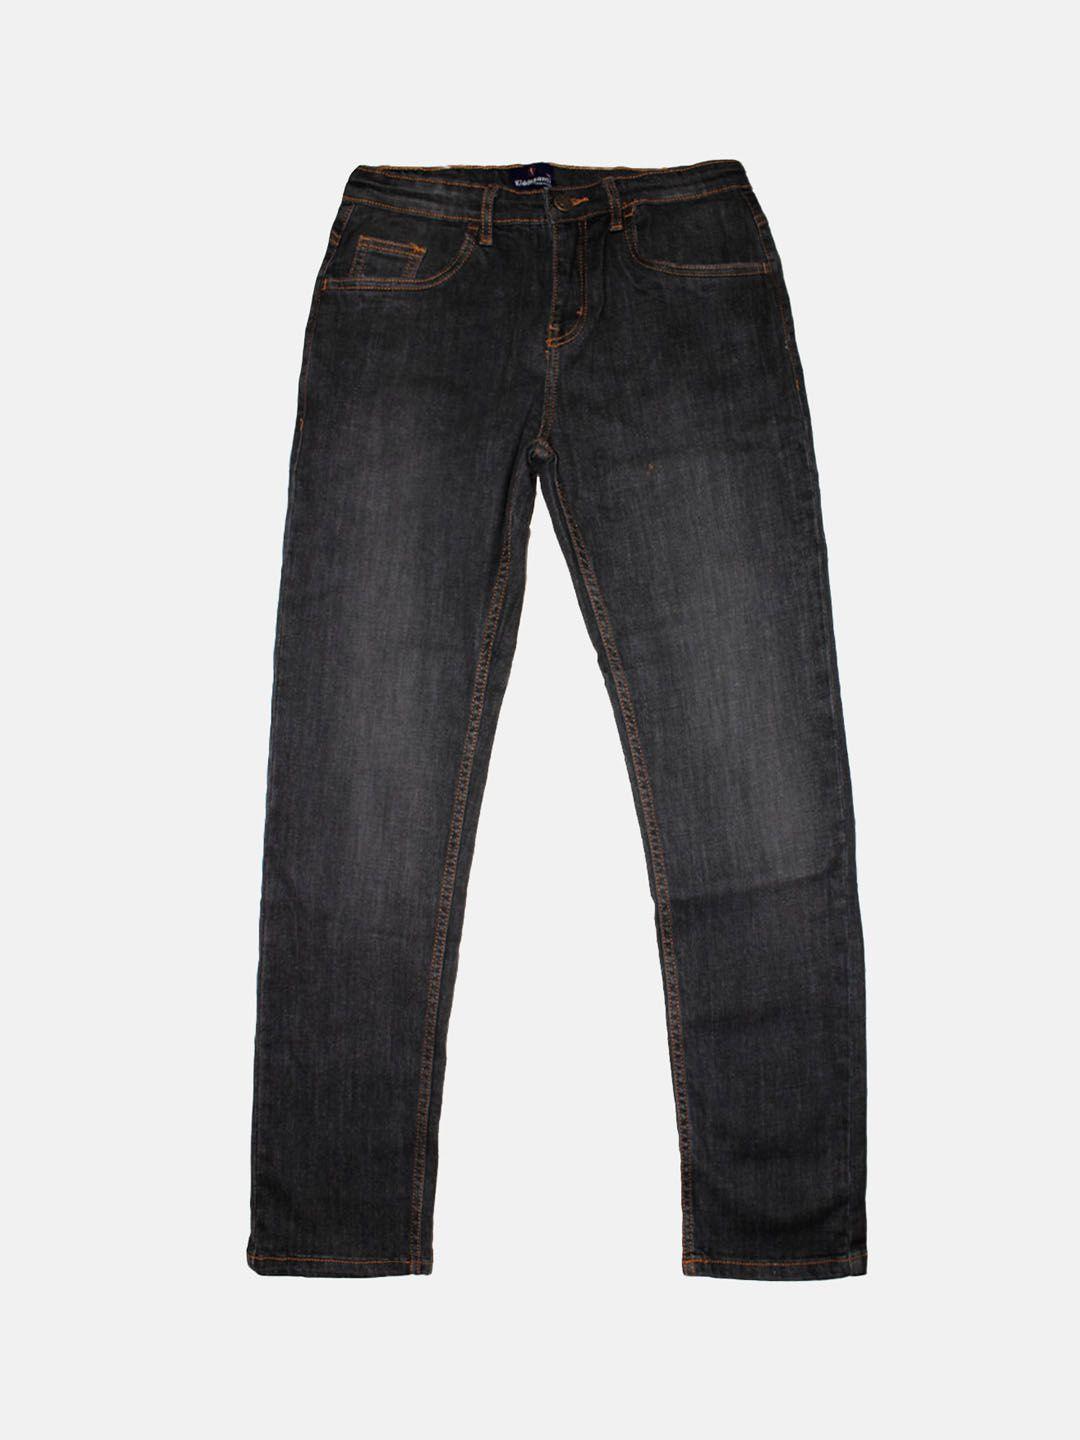 kiddopanti-boys-mid-rise-jean-light-fade-clean-look-stretchable-jeans